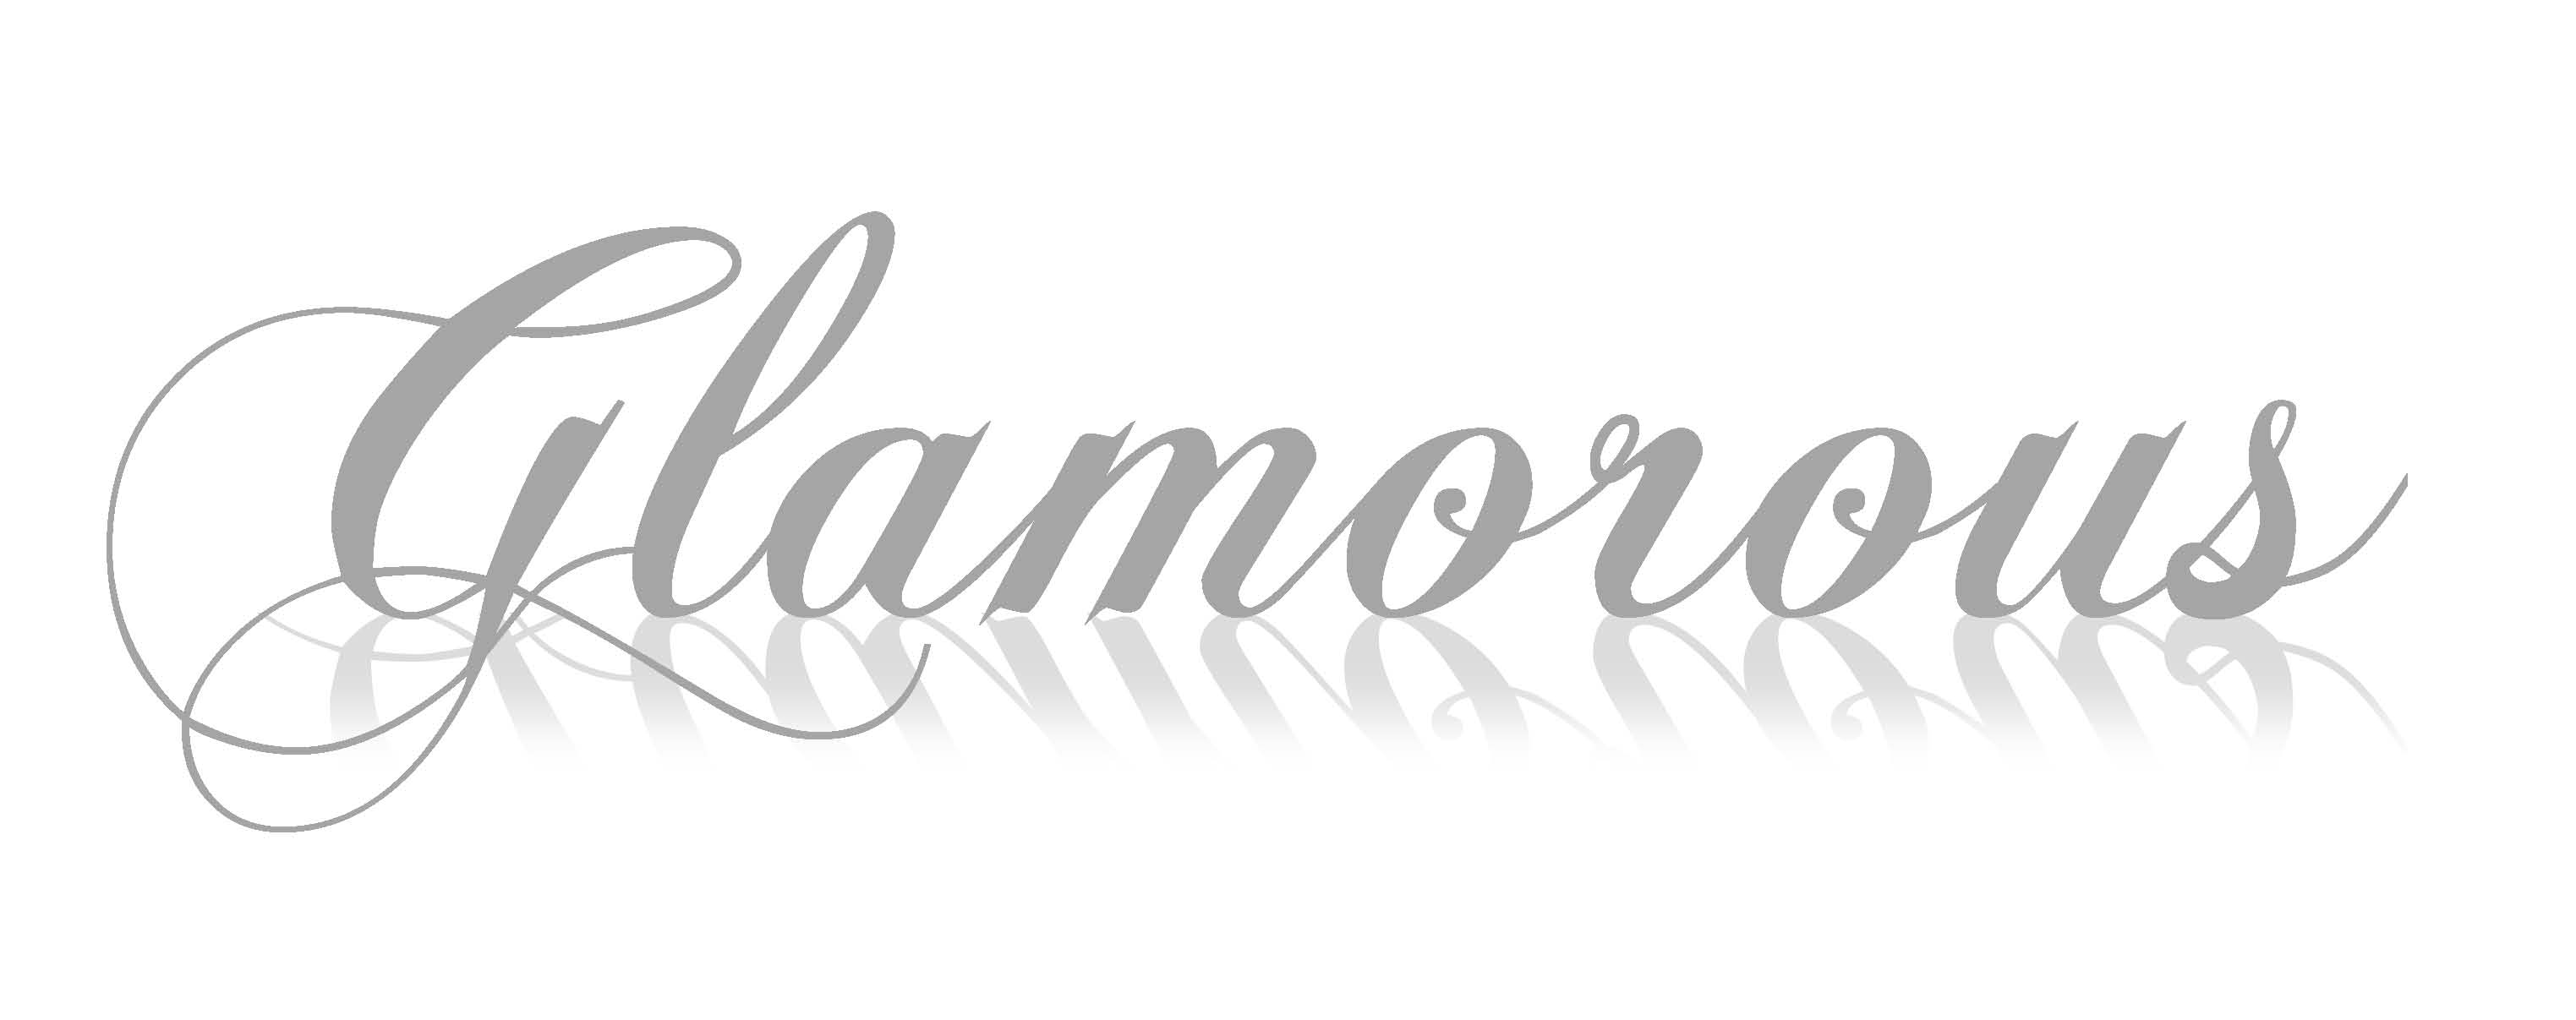 Glamorous by Glam